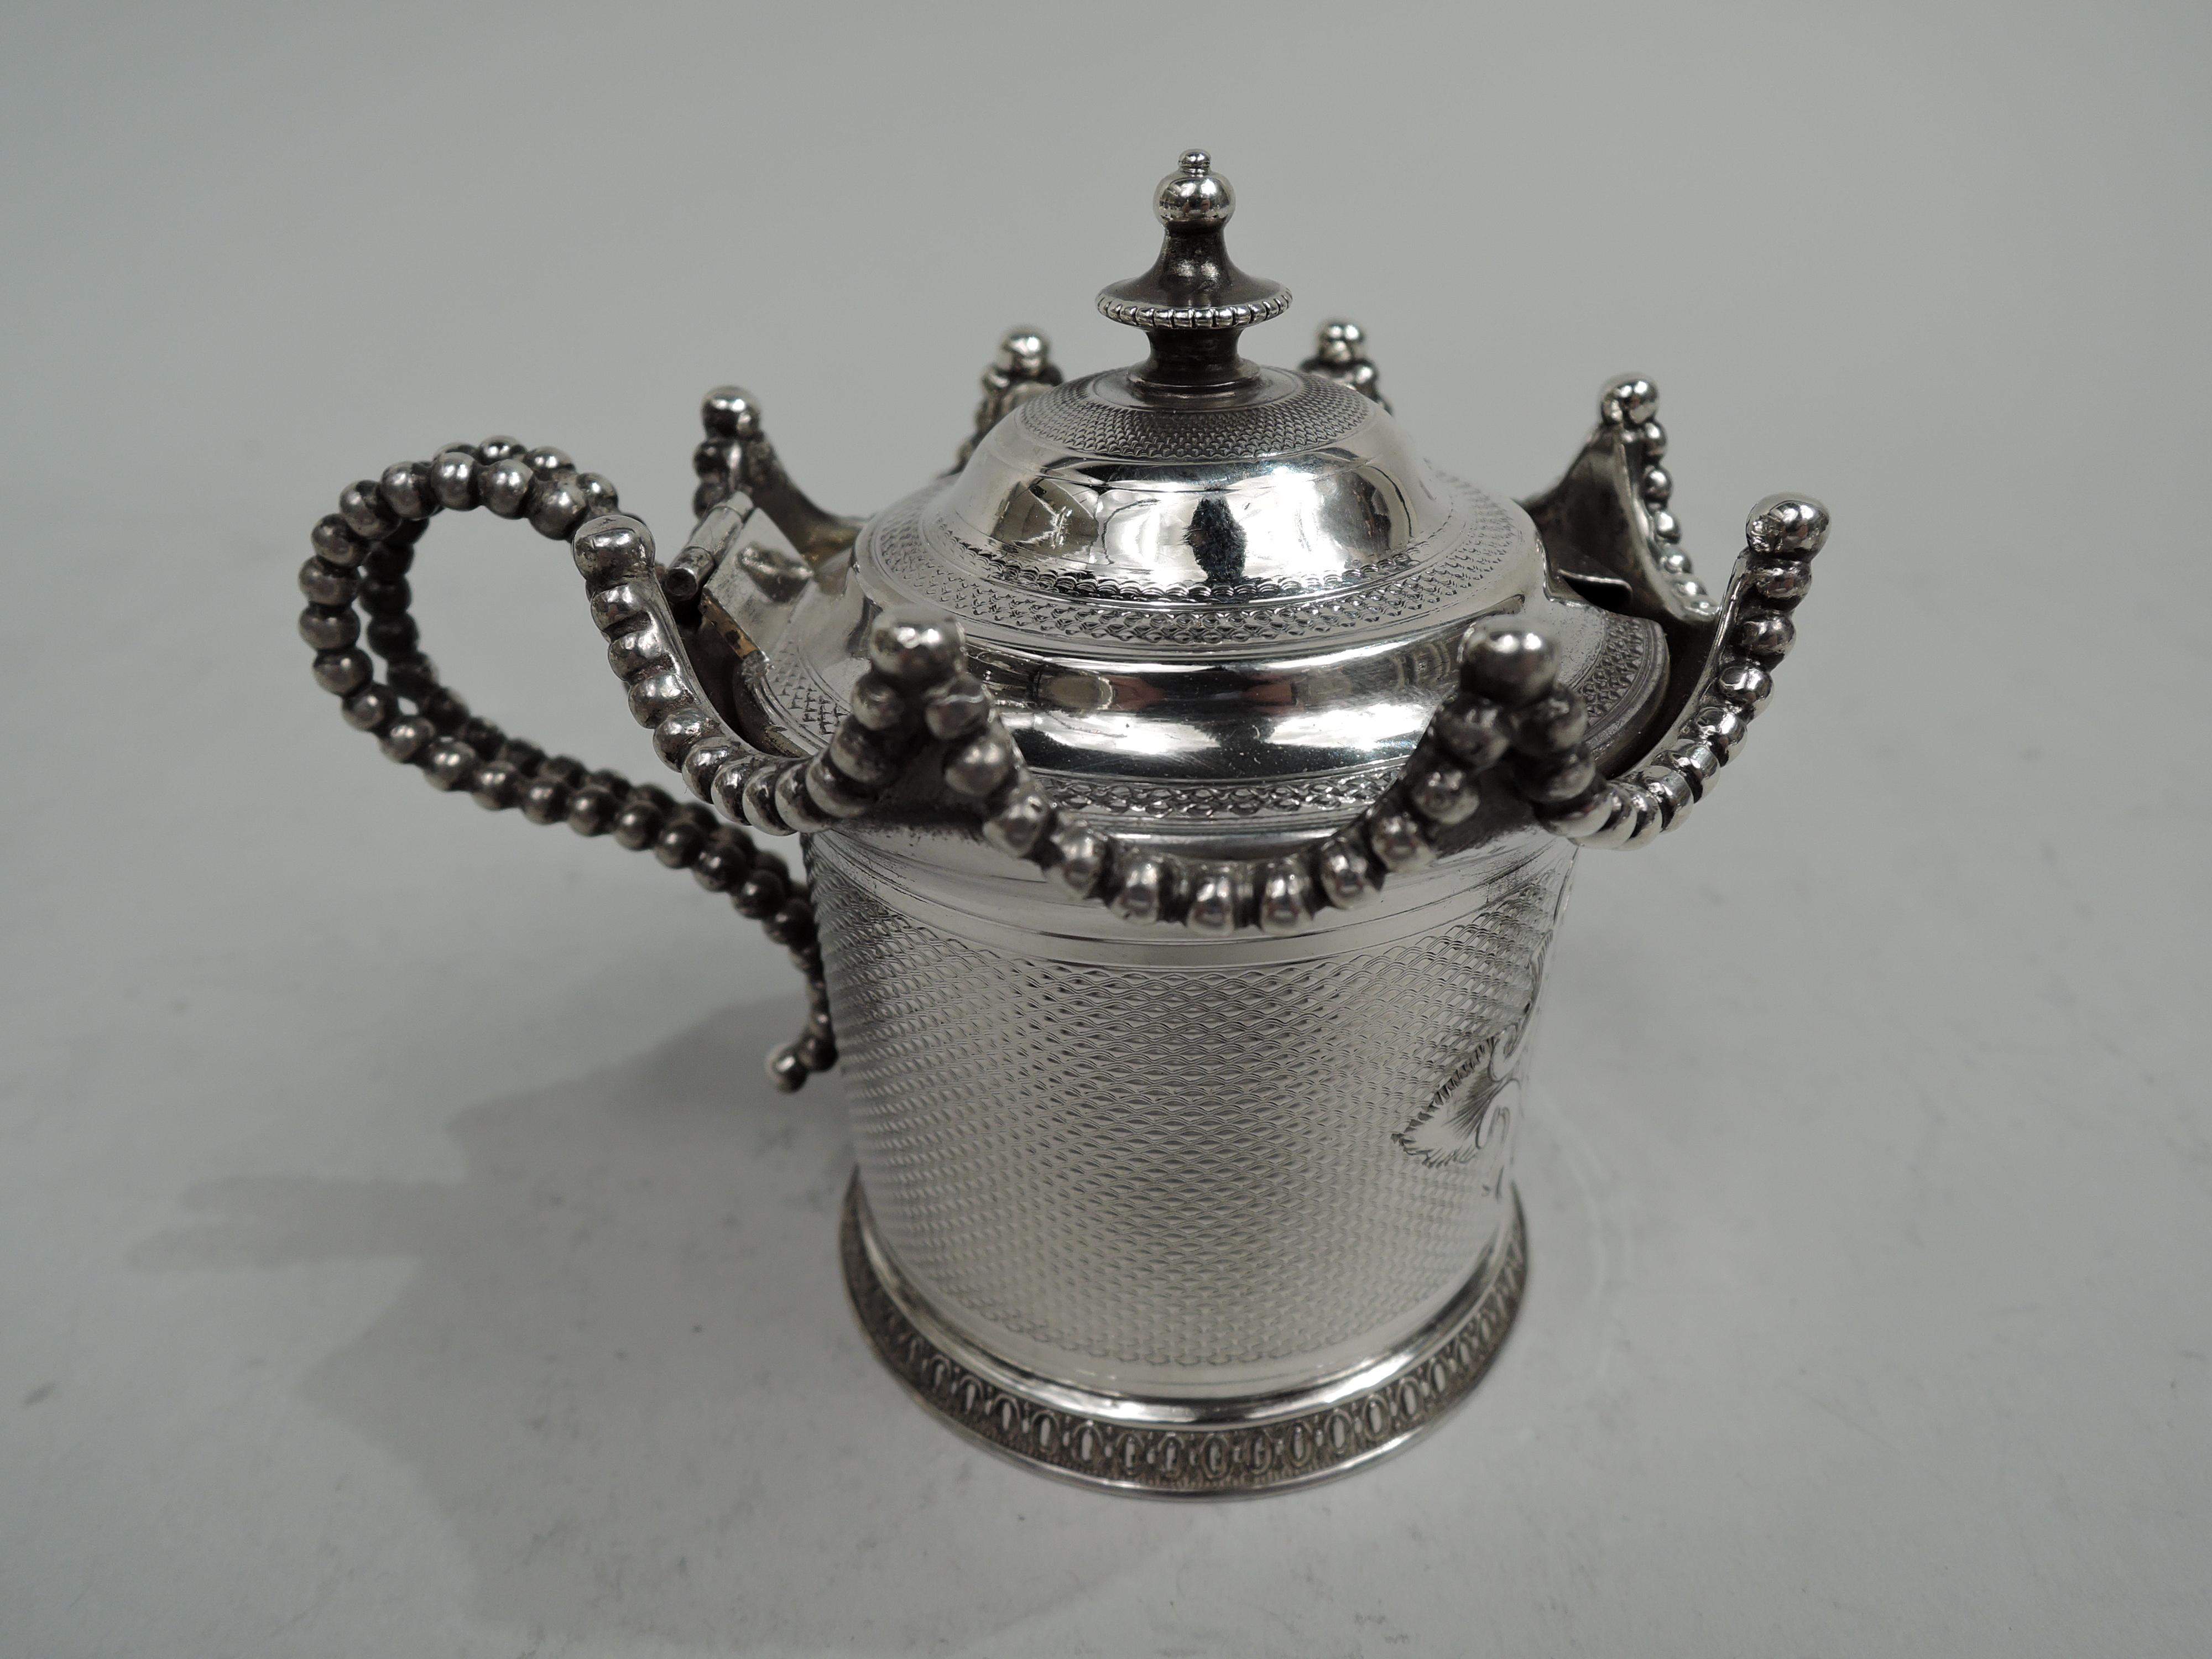 Classical coin silver mustard pot. Made by Wood & Hughes in New York, ca 1850. Drum-form bowl and spread foot with egg-and-dart border on lined ground. Beaded pavilion-style wavy rim and split and beaded high-looping handle. Cover hinged and domed